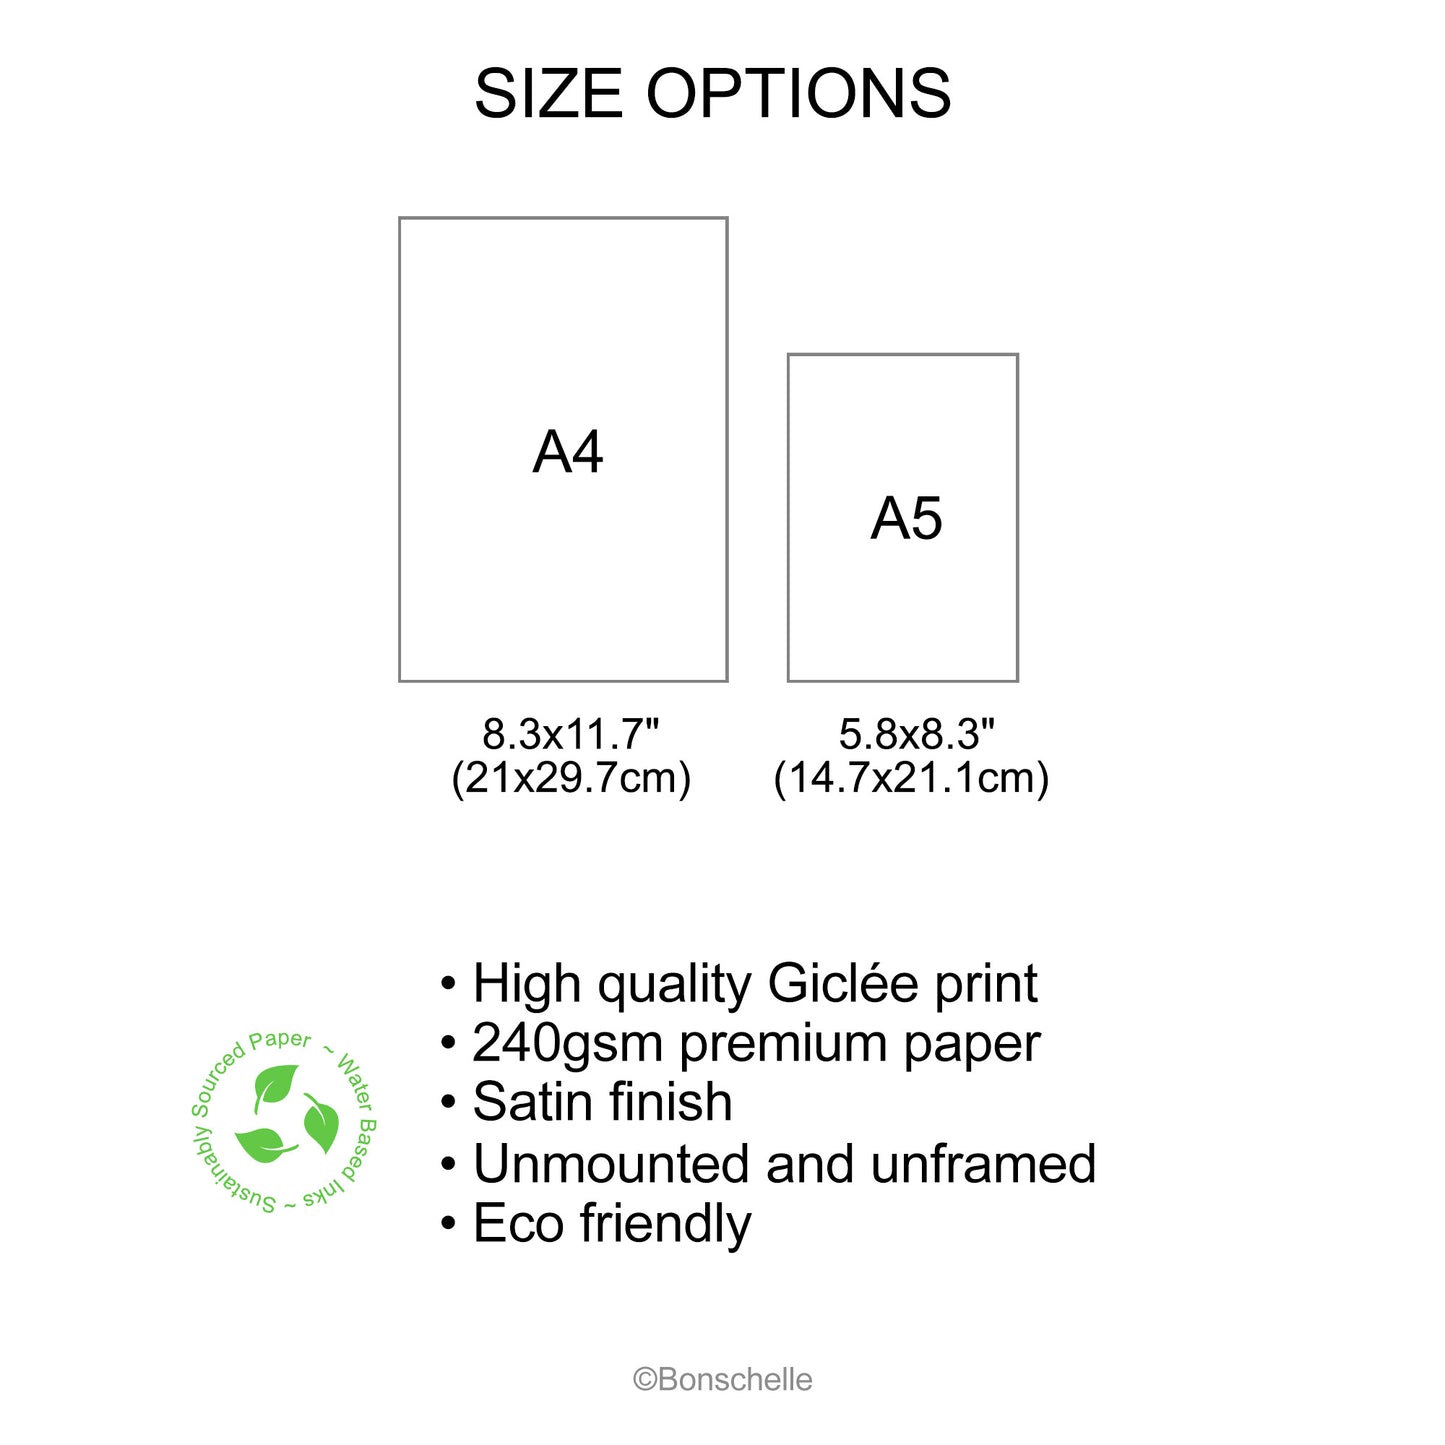 Size options and product details